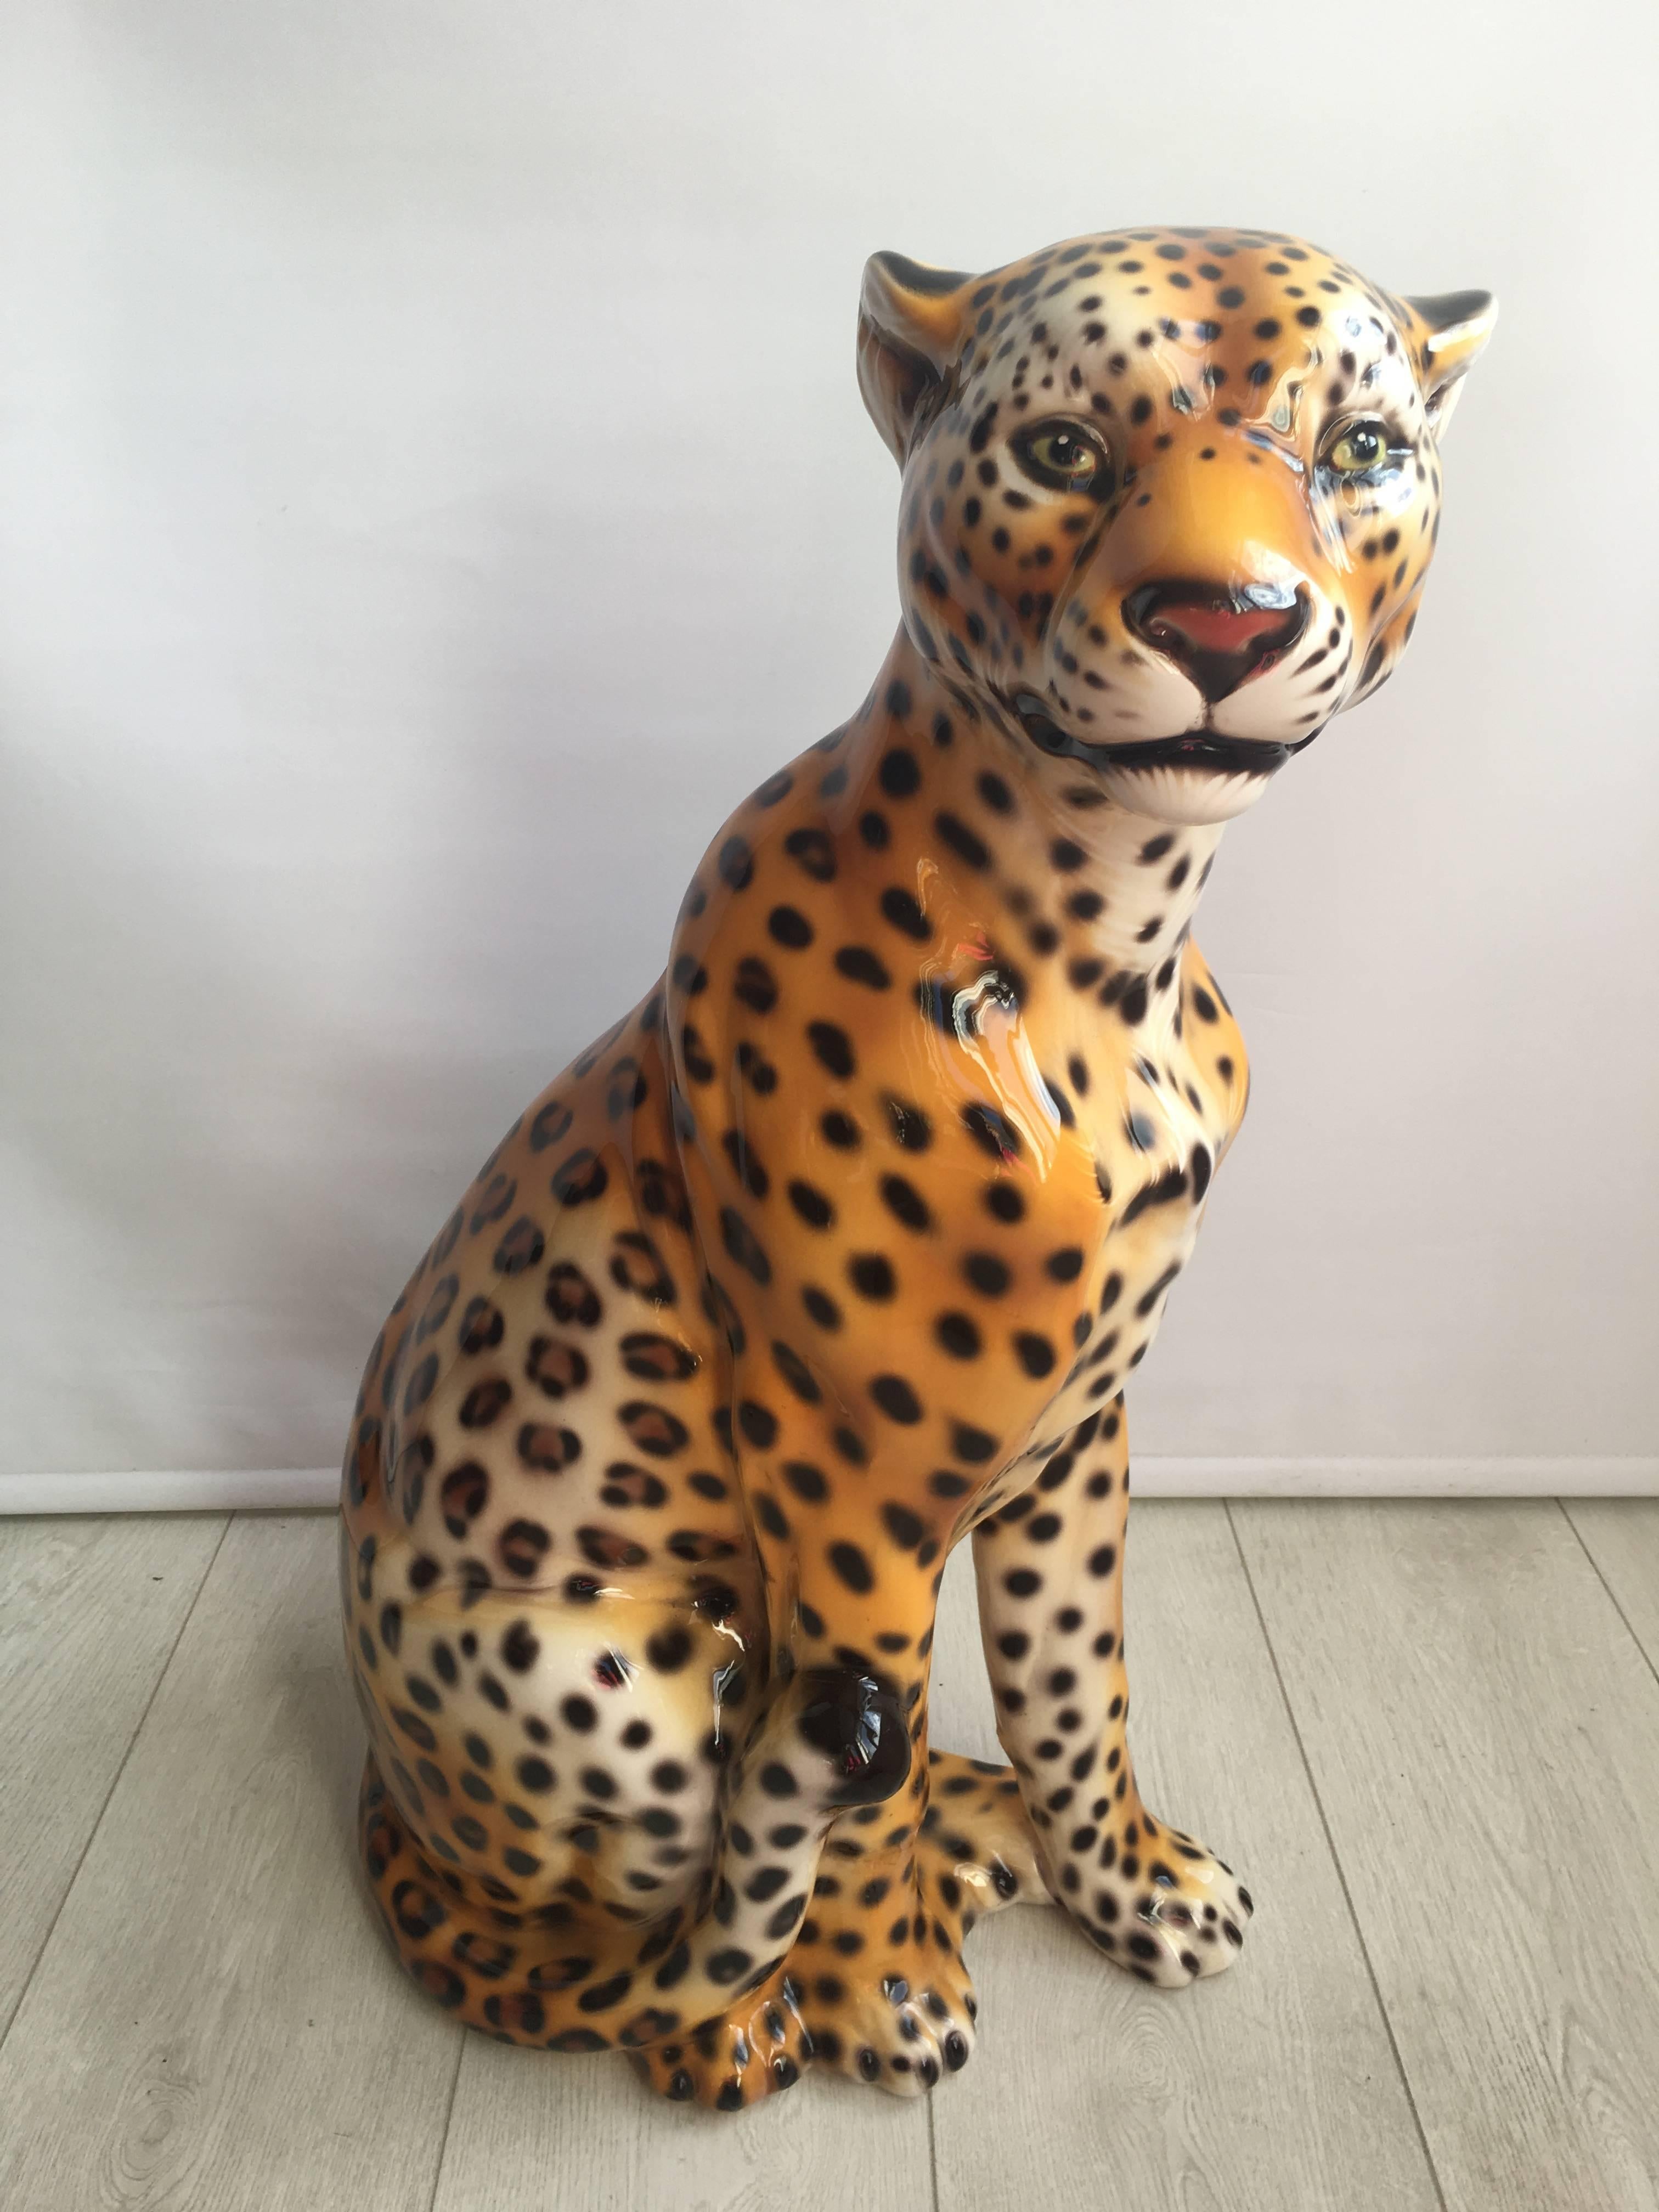 In perfect condition, a very beautiful ceramic leopard. Measure: 86 cm tall.